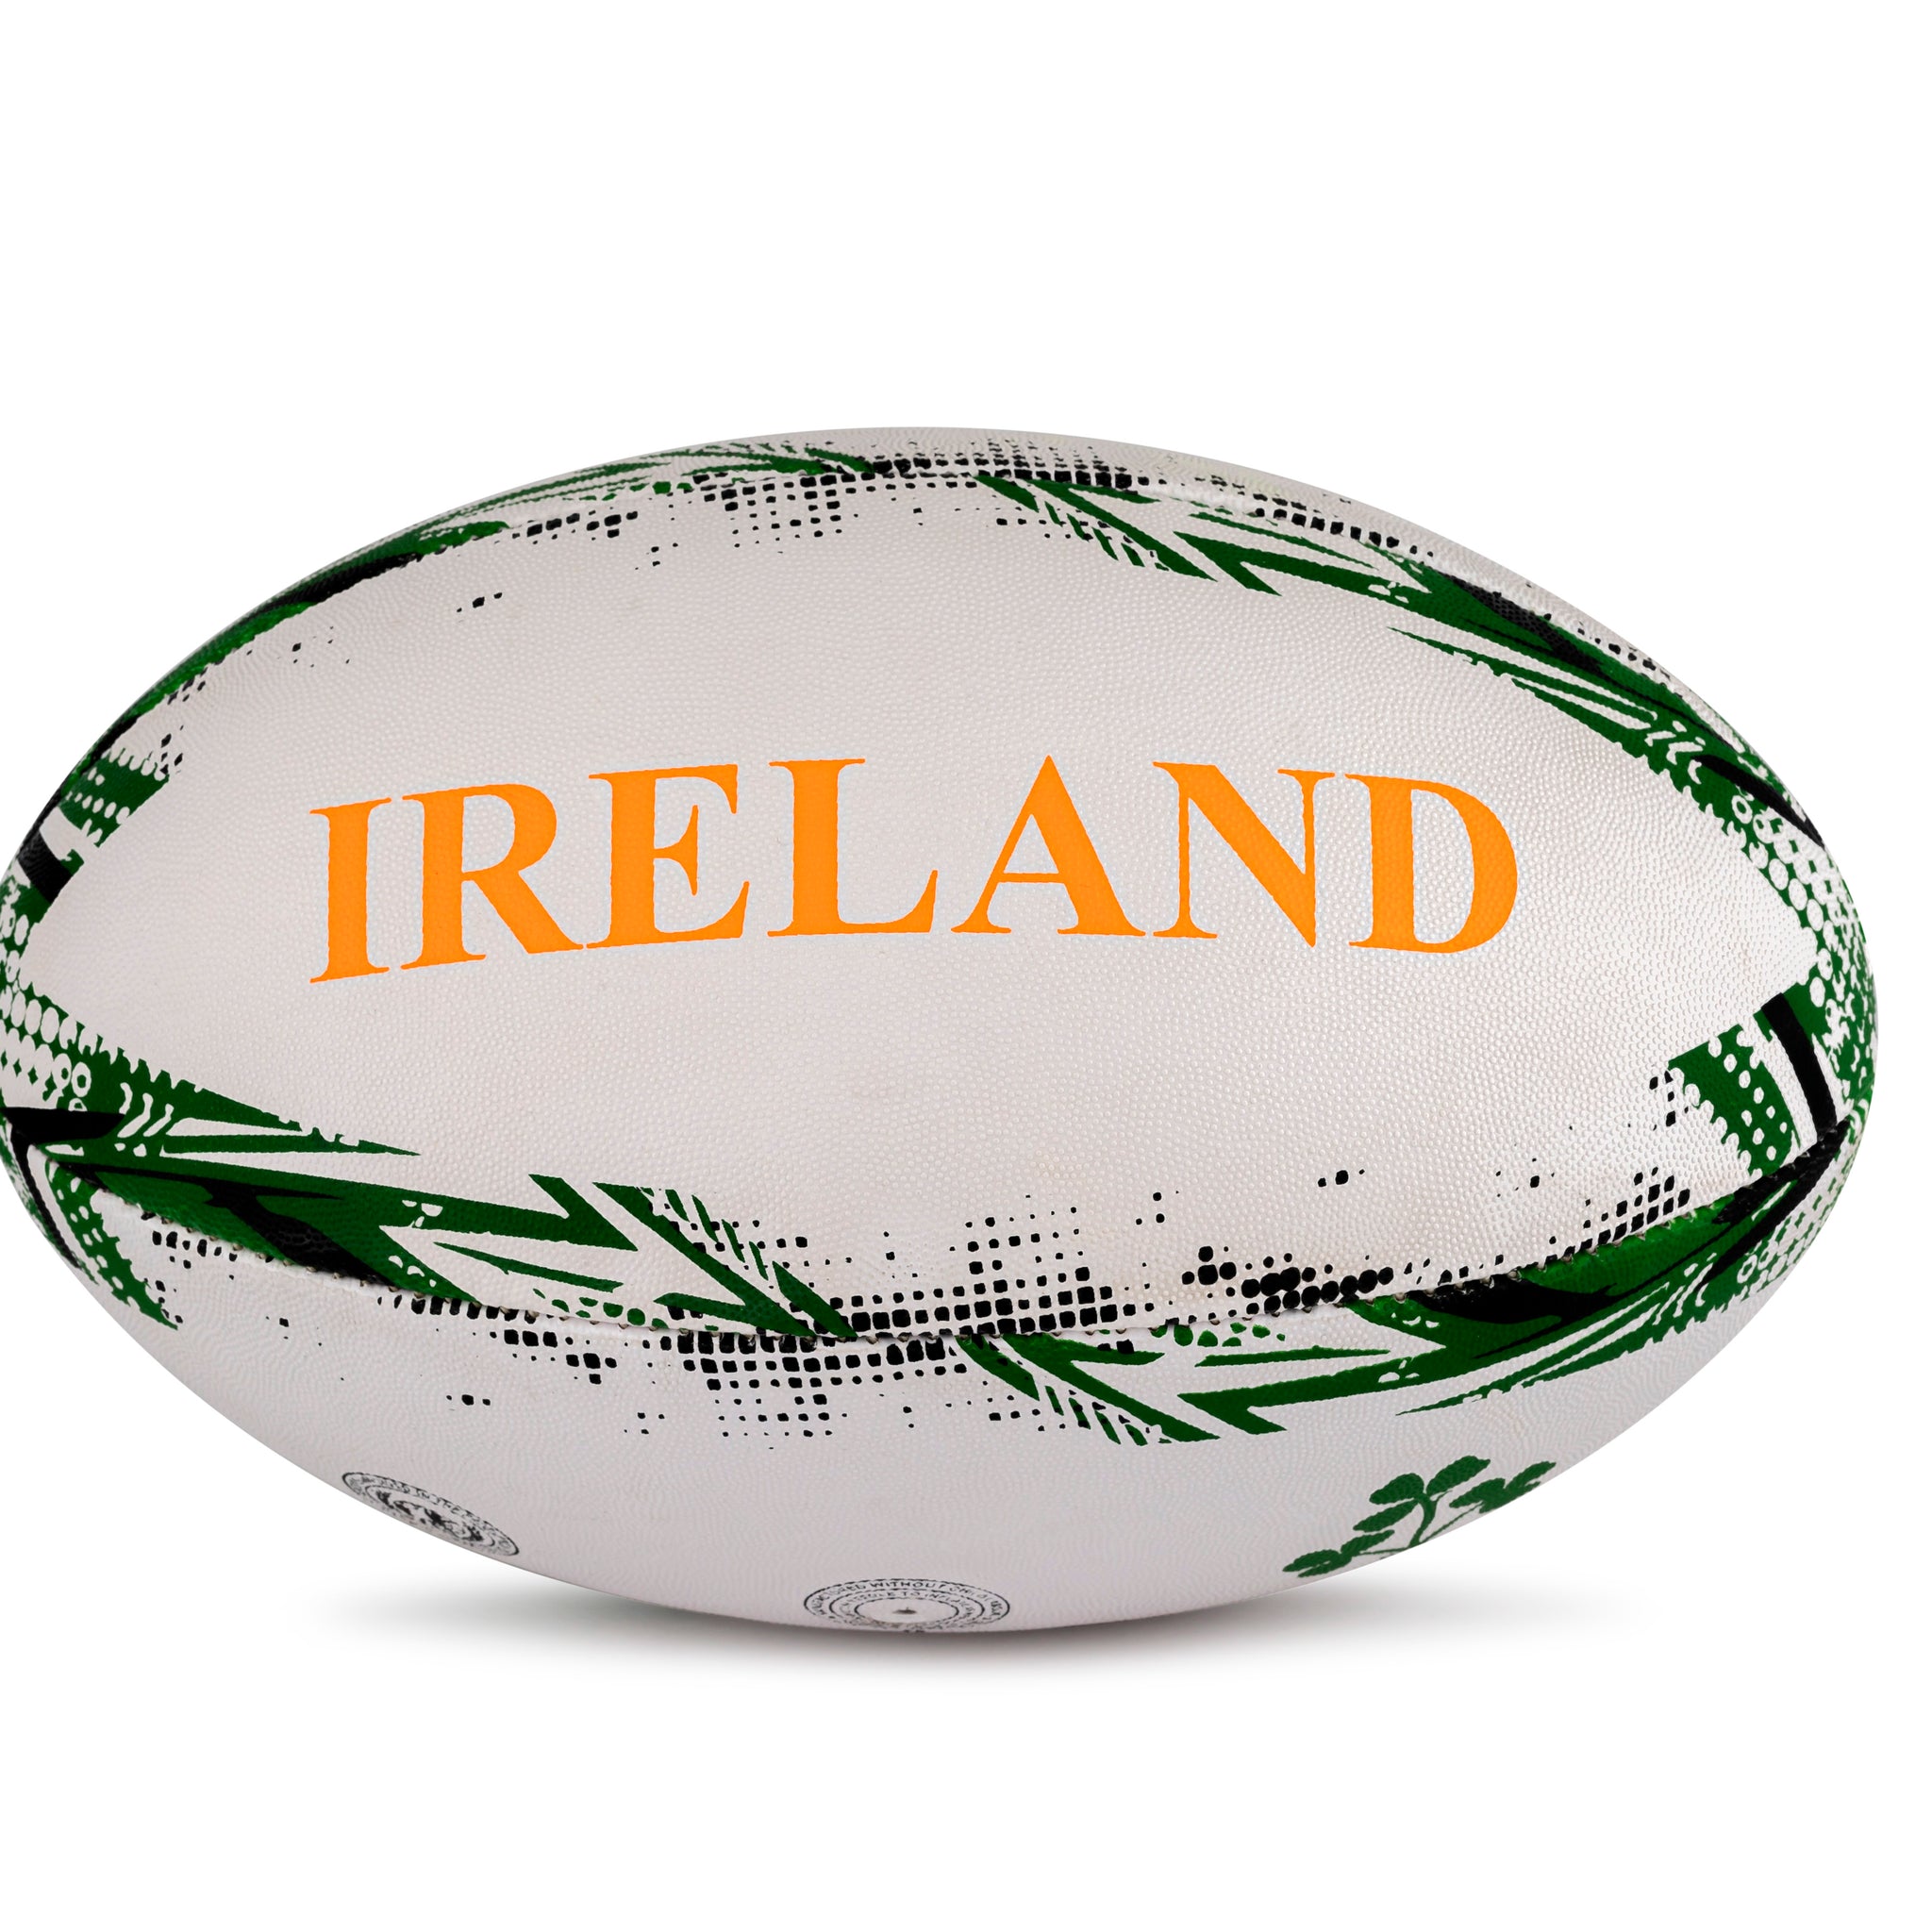 Ireland Rugby Supporters ball